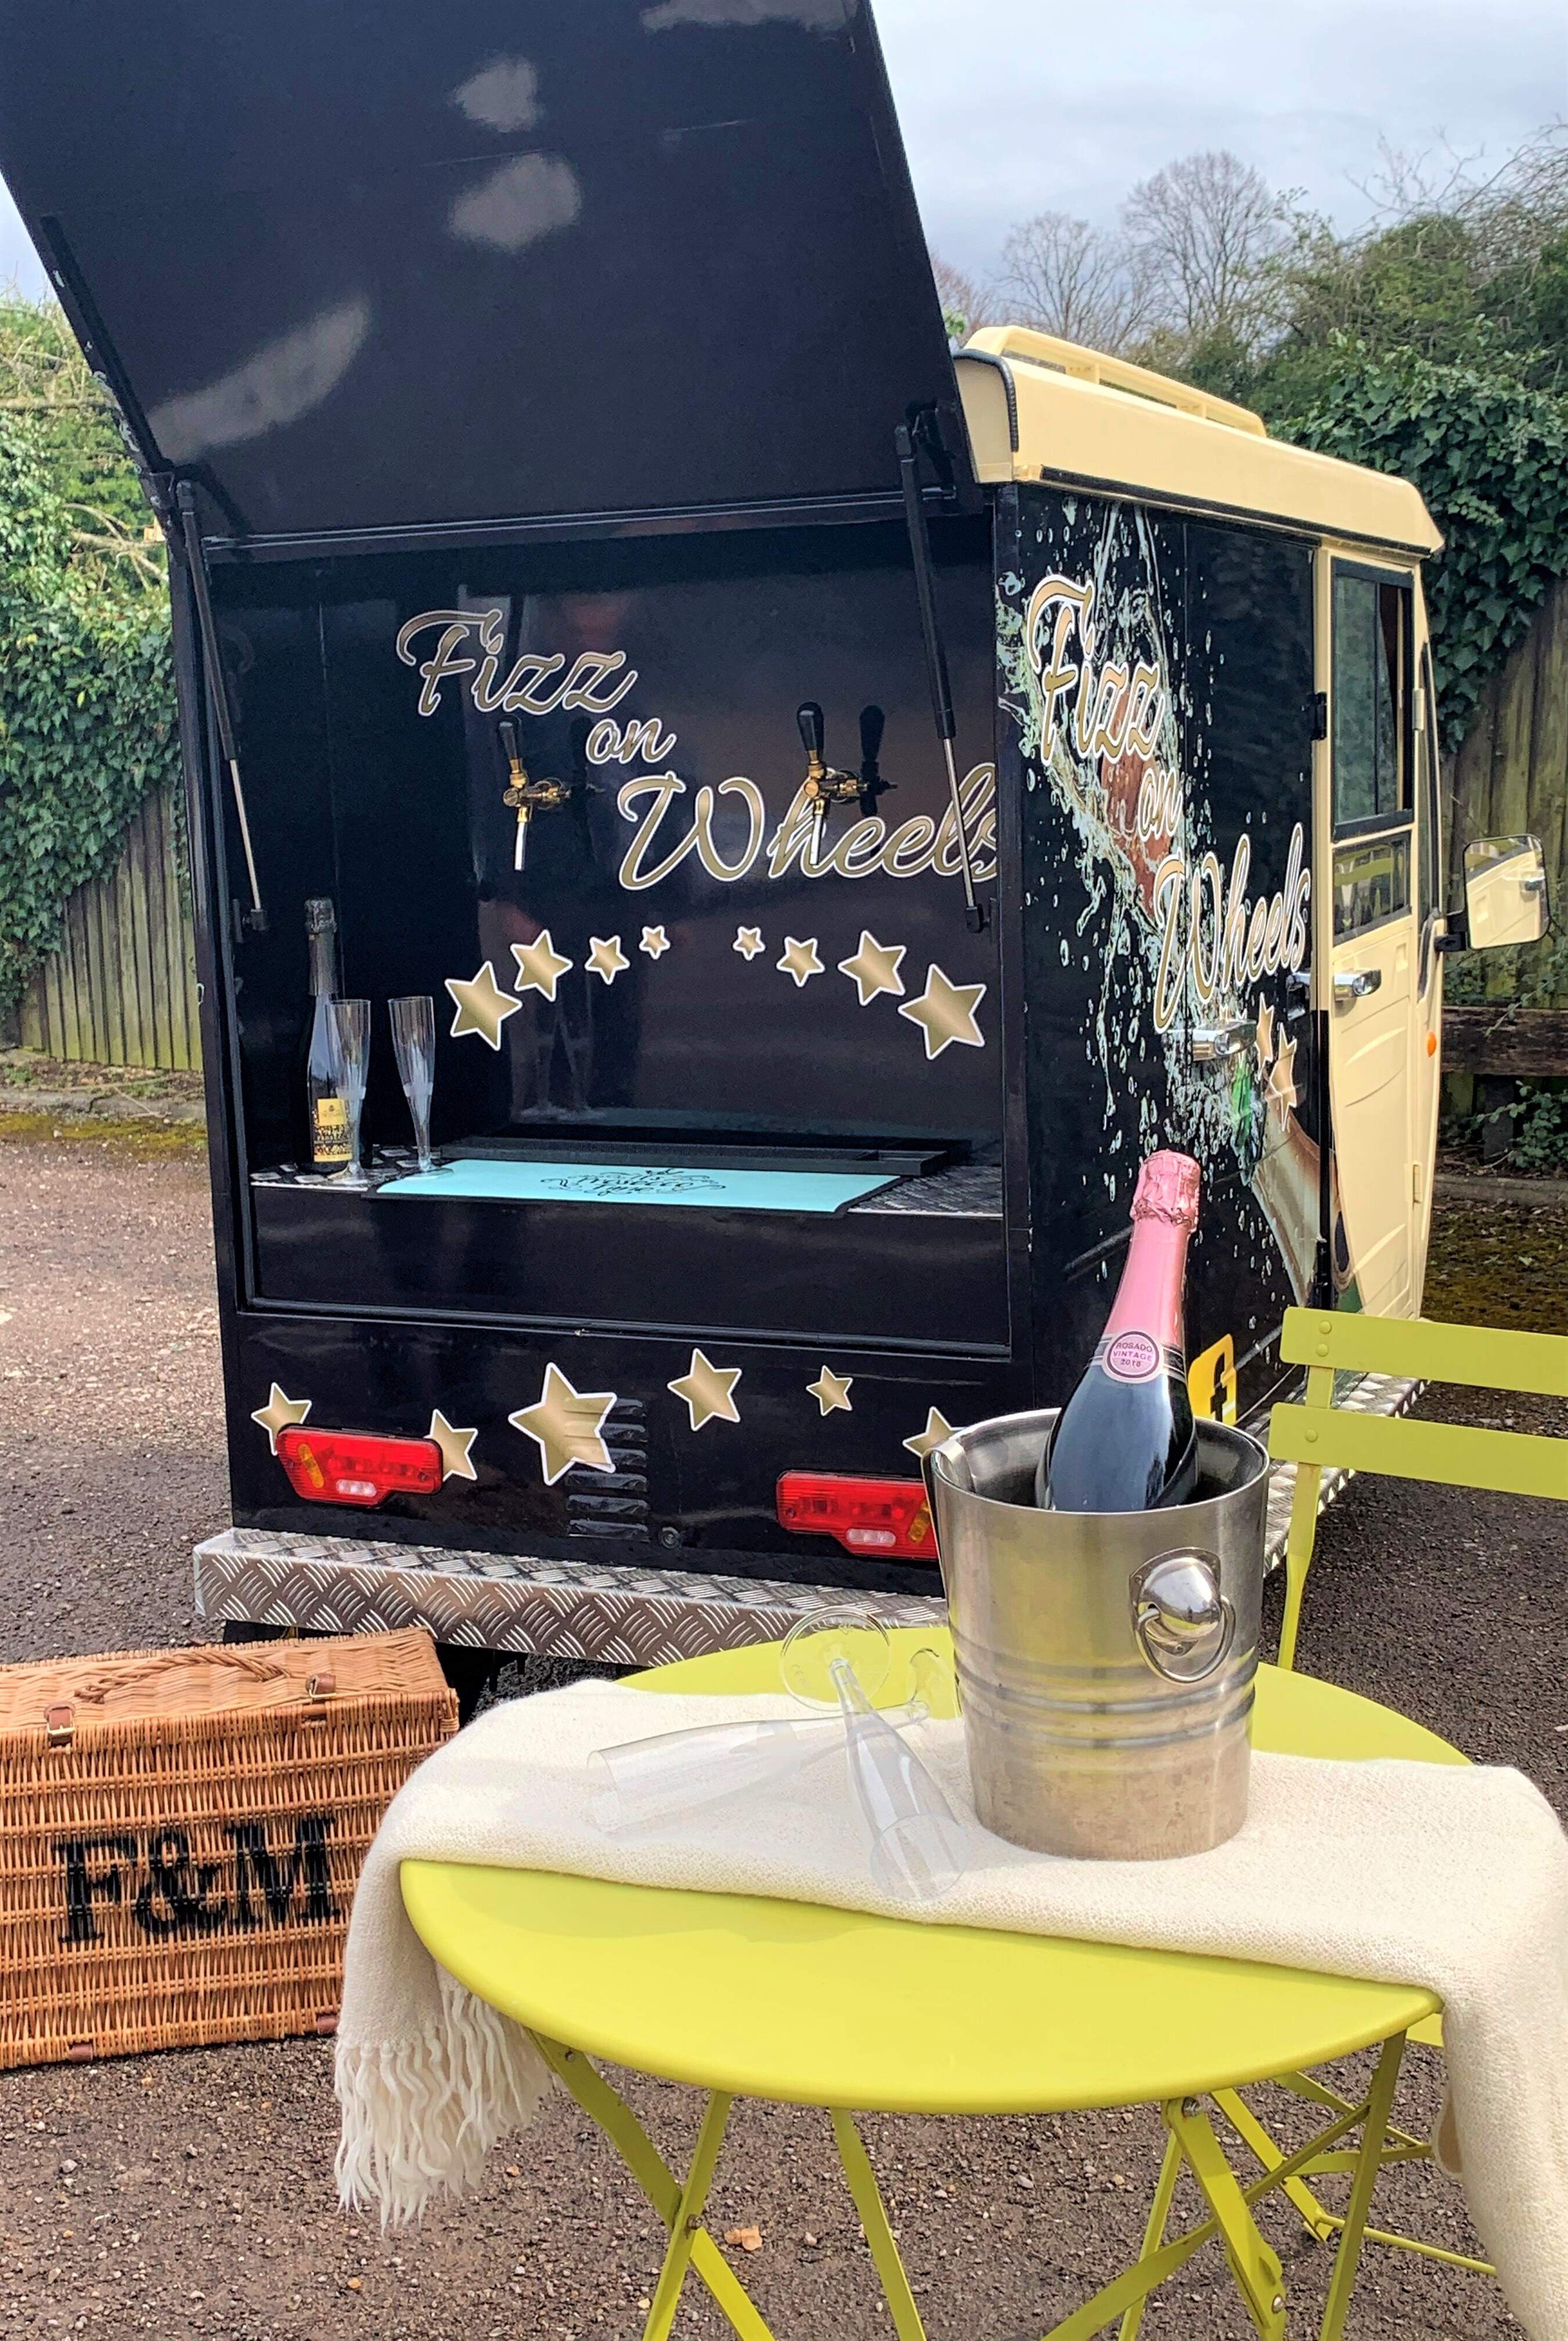 Fizz on wheels, mobile Tuk Tuk for hen parties, baby showers, weddings and birthday parties